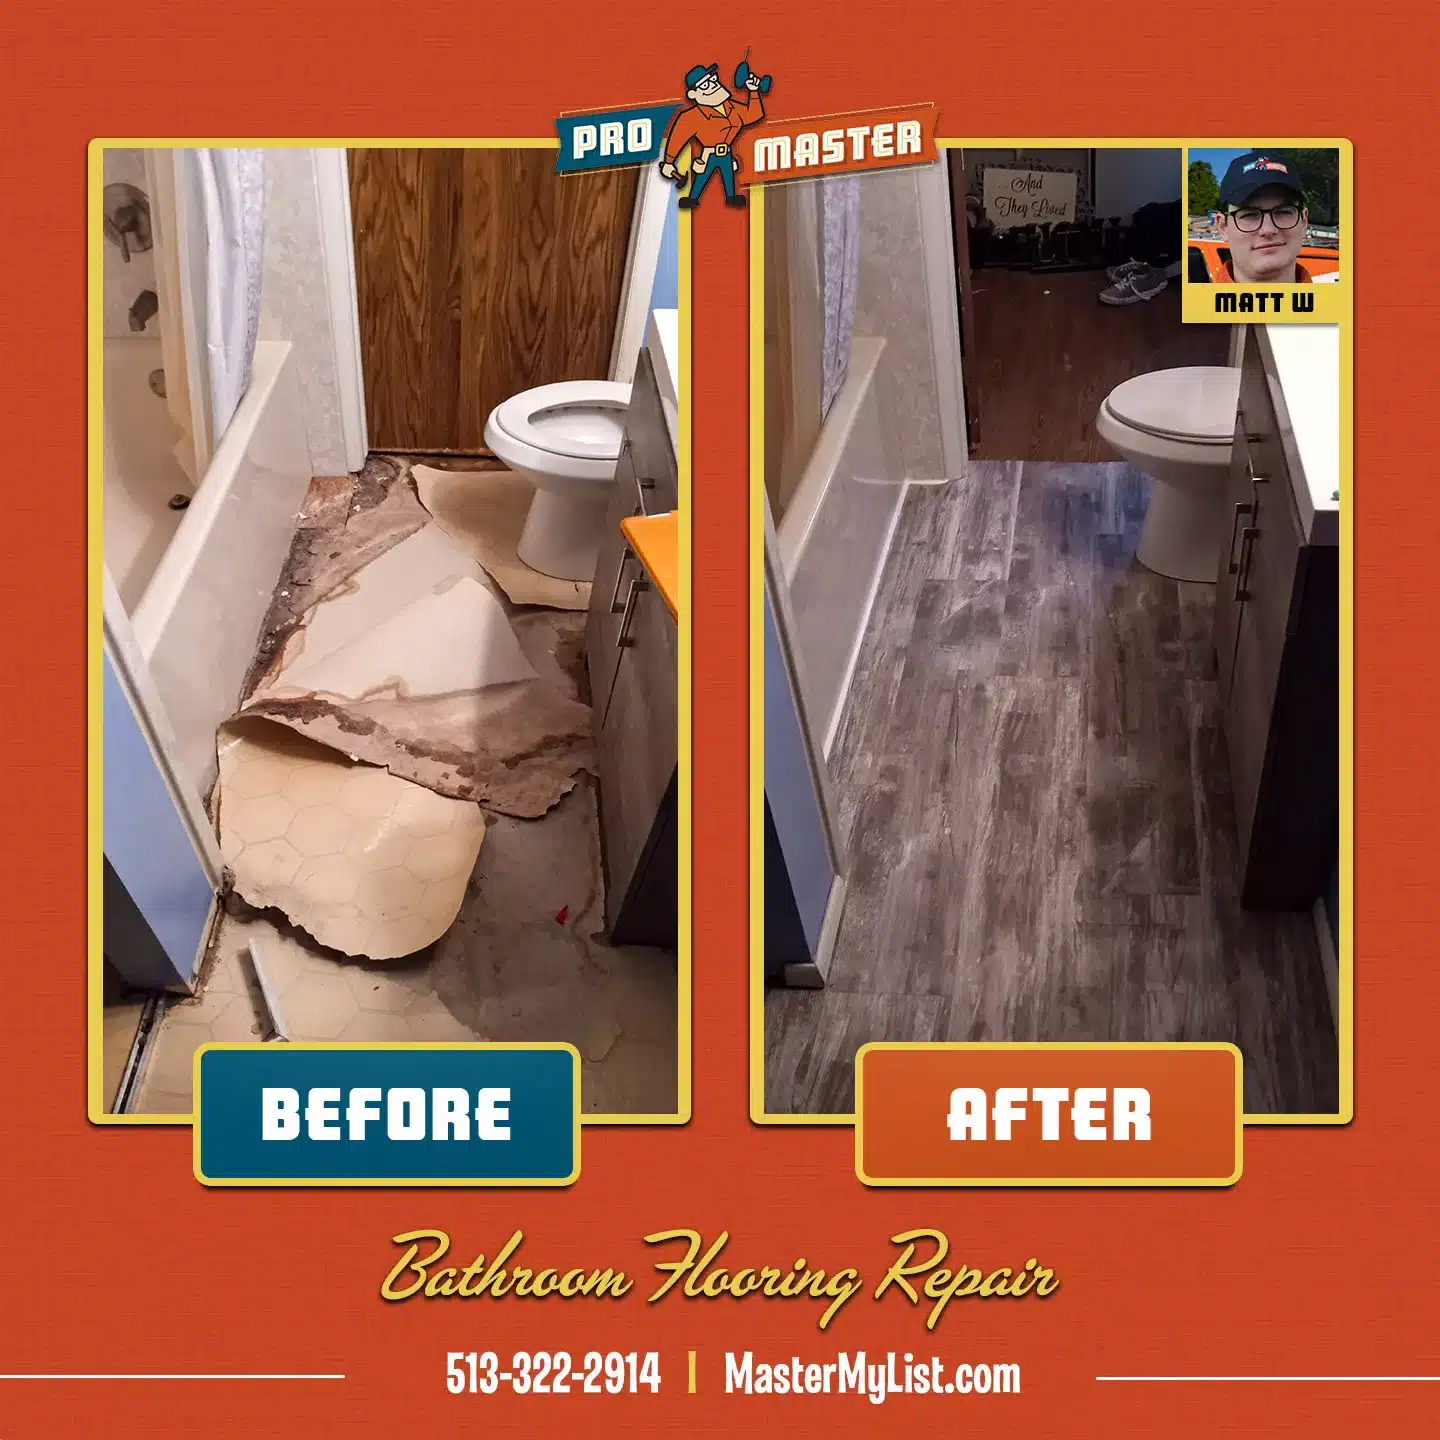 Before and After comparison of old flooring to new luxury vinyl flooring.